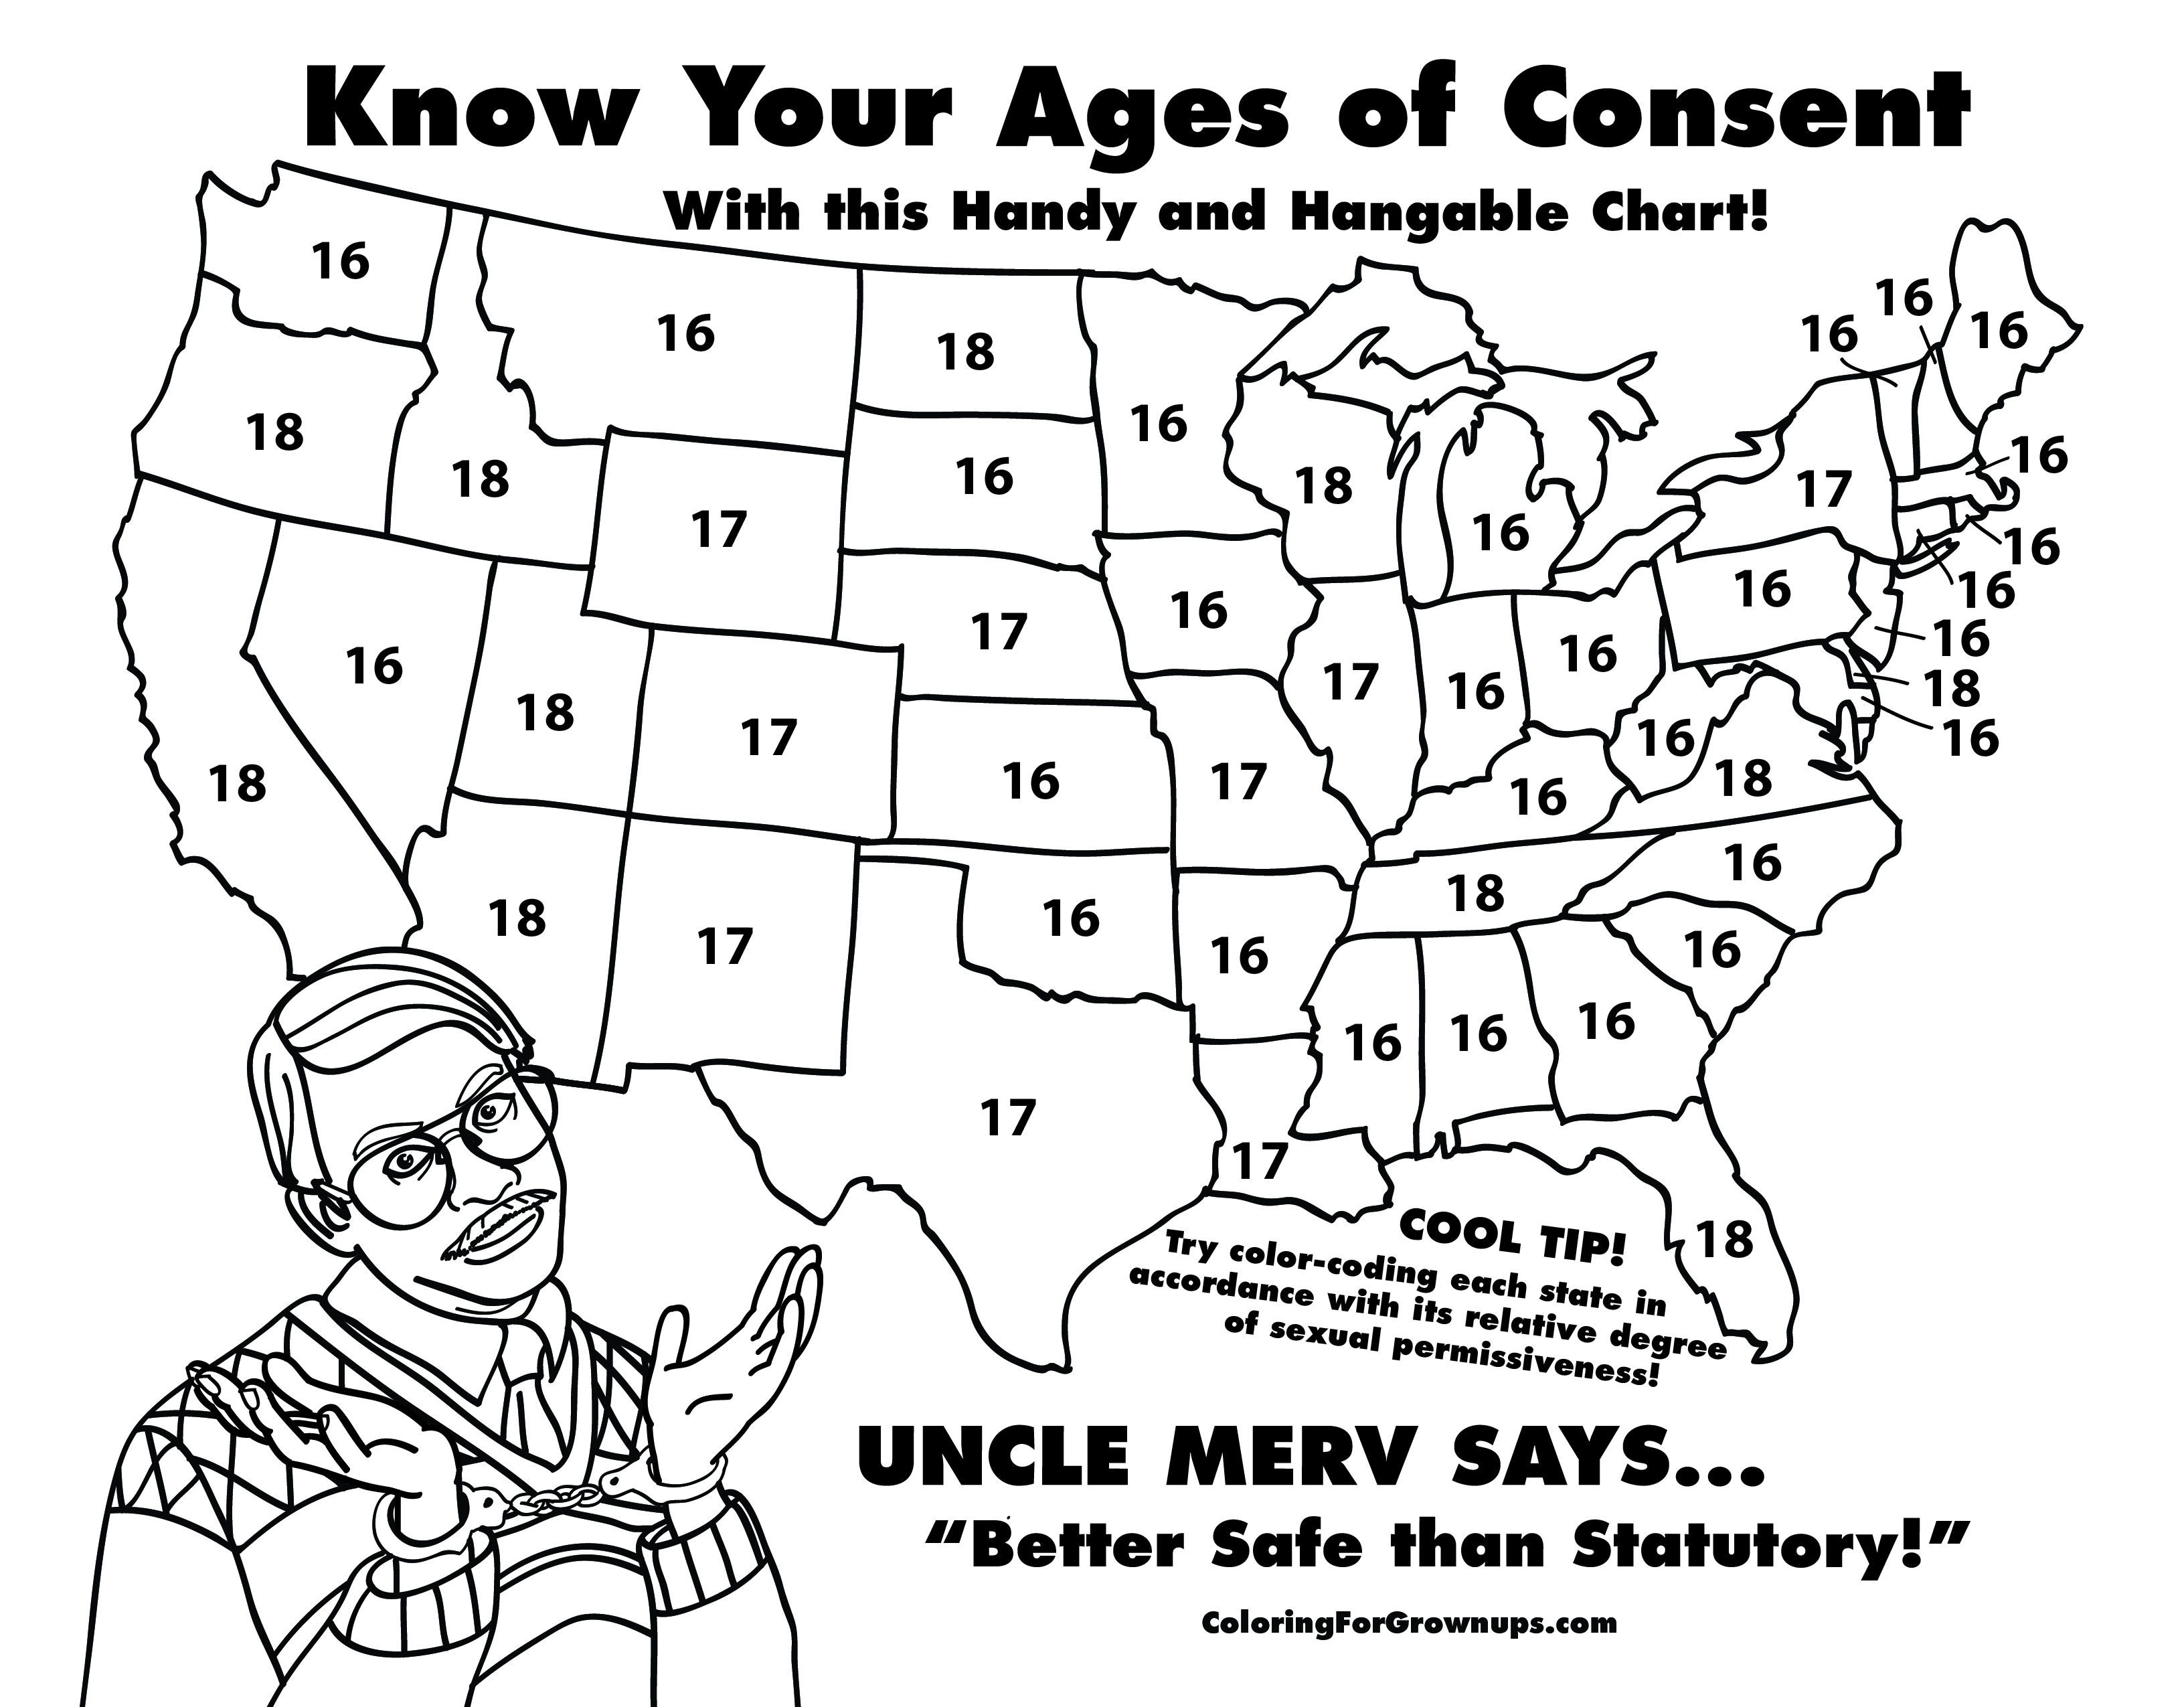 know-your-ages-of-consent.jpg